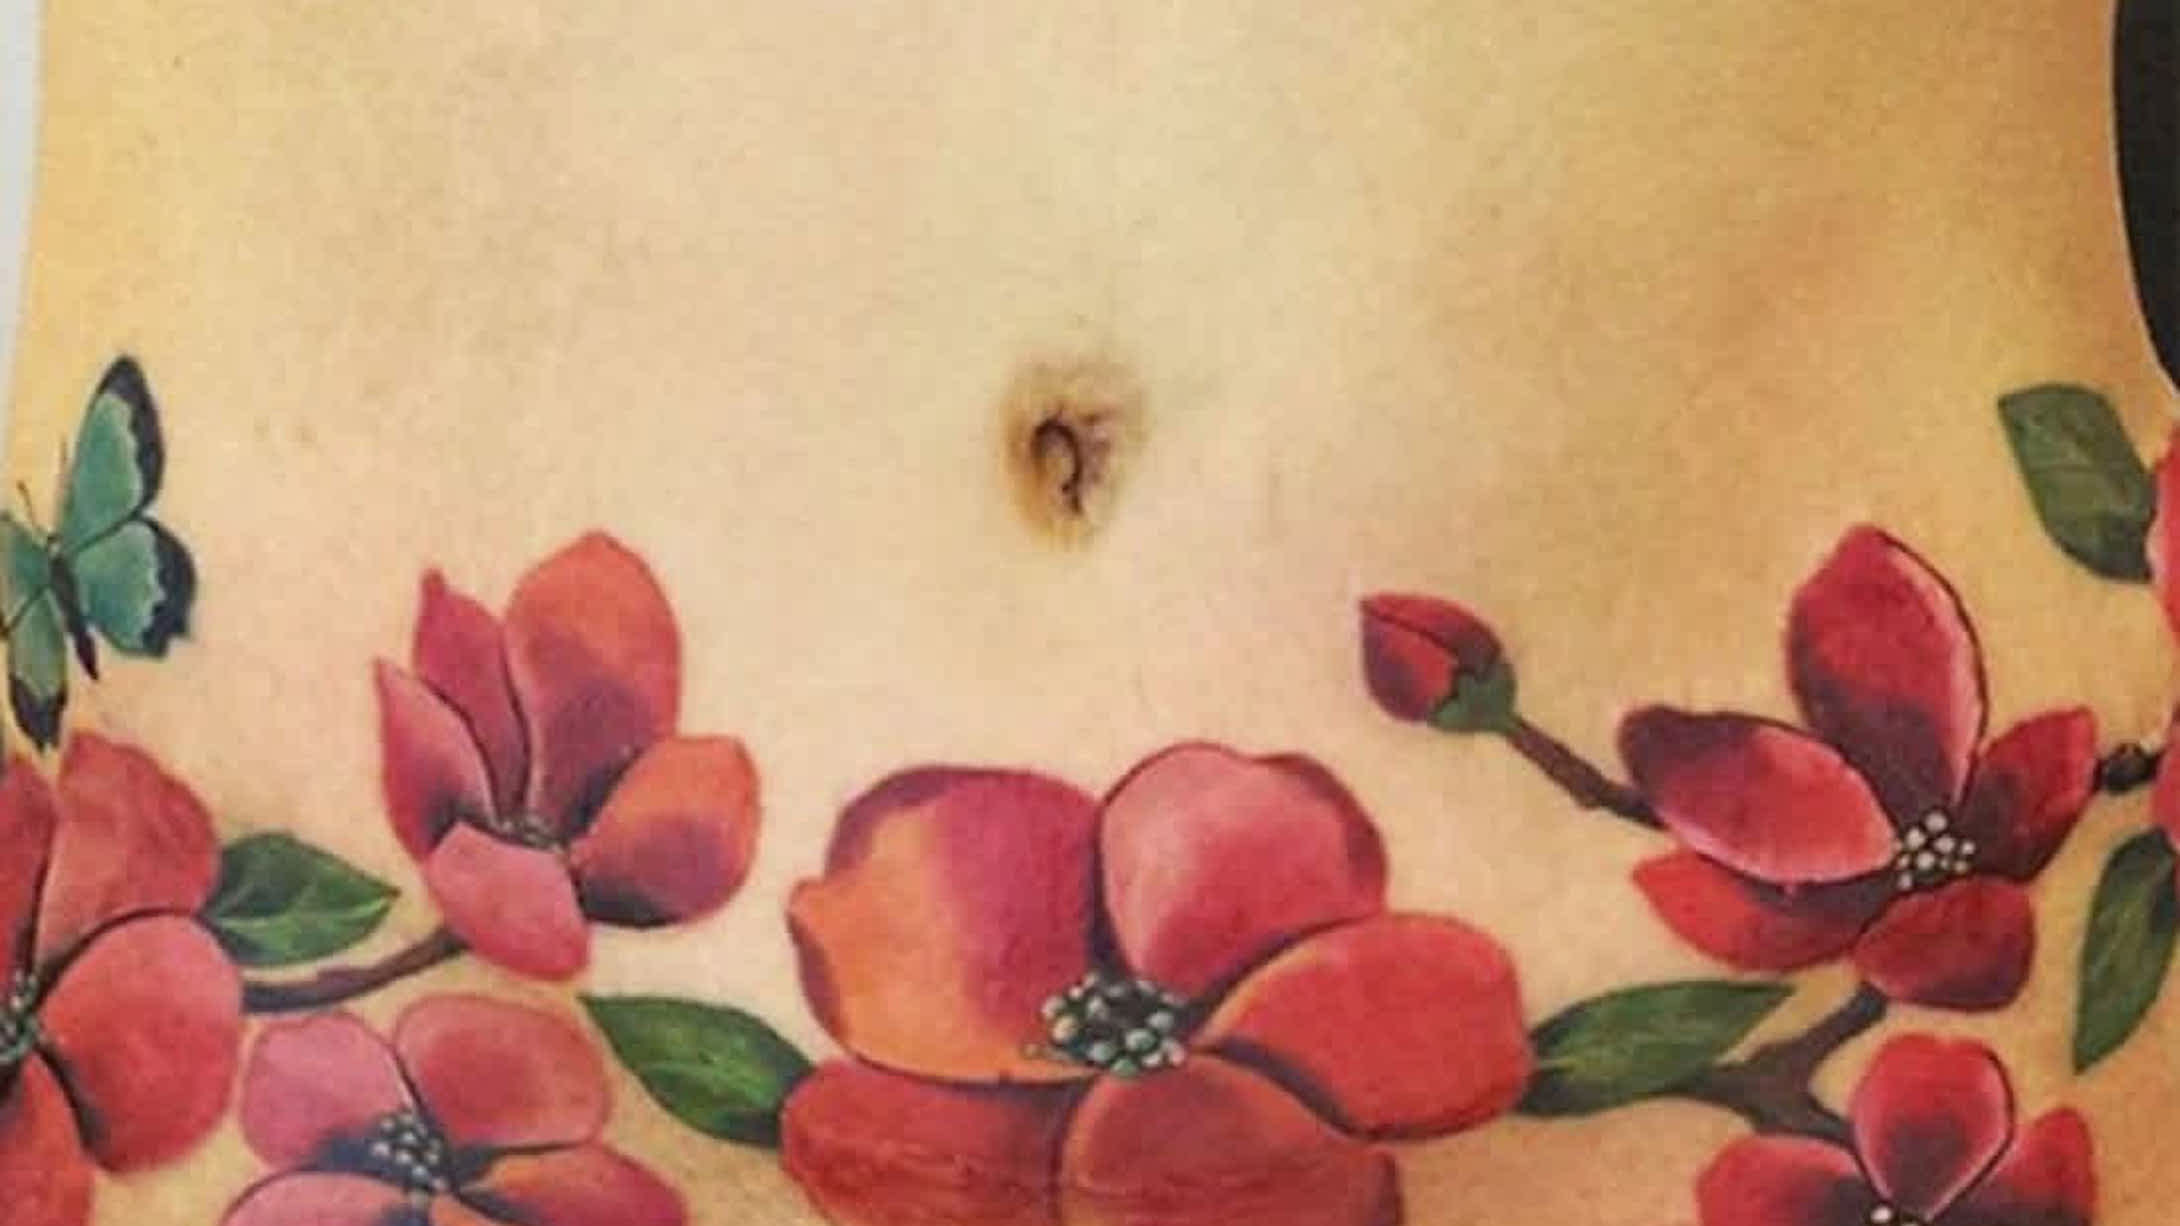 Tattoo uploaded by Scratch Tattoos  Tummy tucks and C section Scars  can make you feel ugly Getting tattooed may make you feel and look  beautiful again freehand tummytuck csection bythailandmike  Thailandmike 